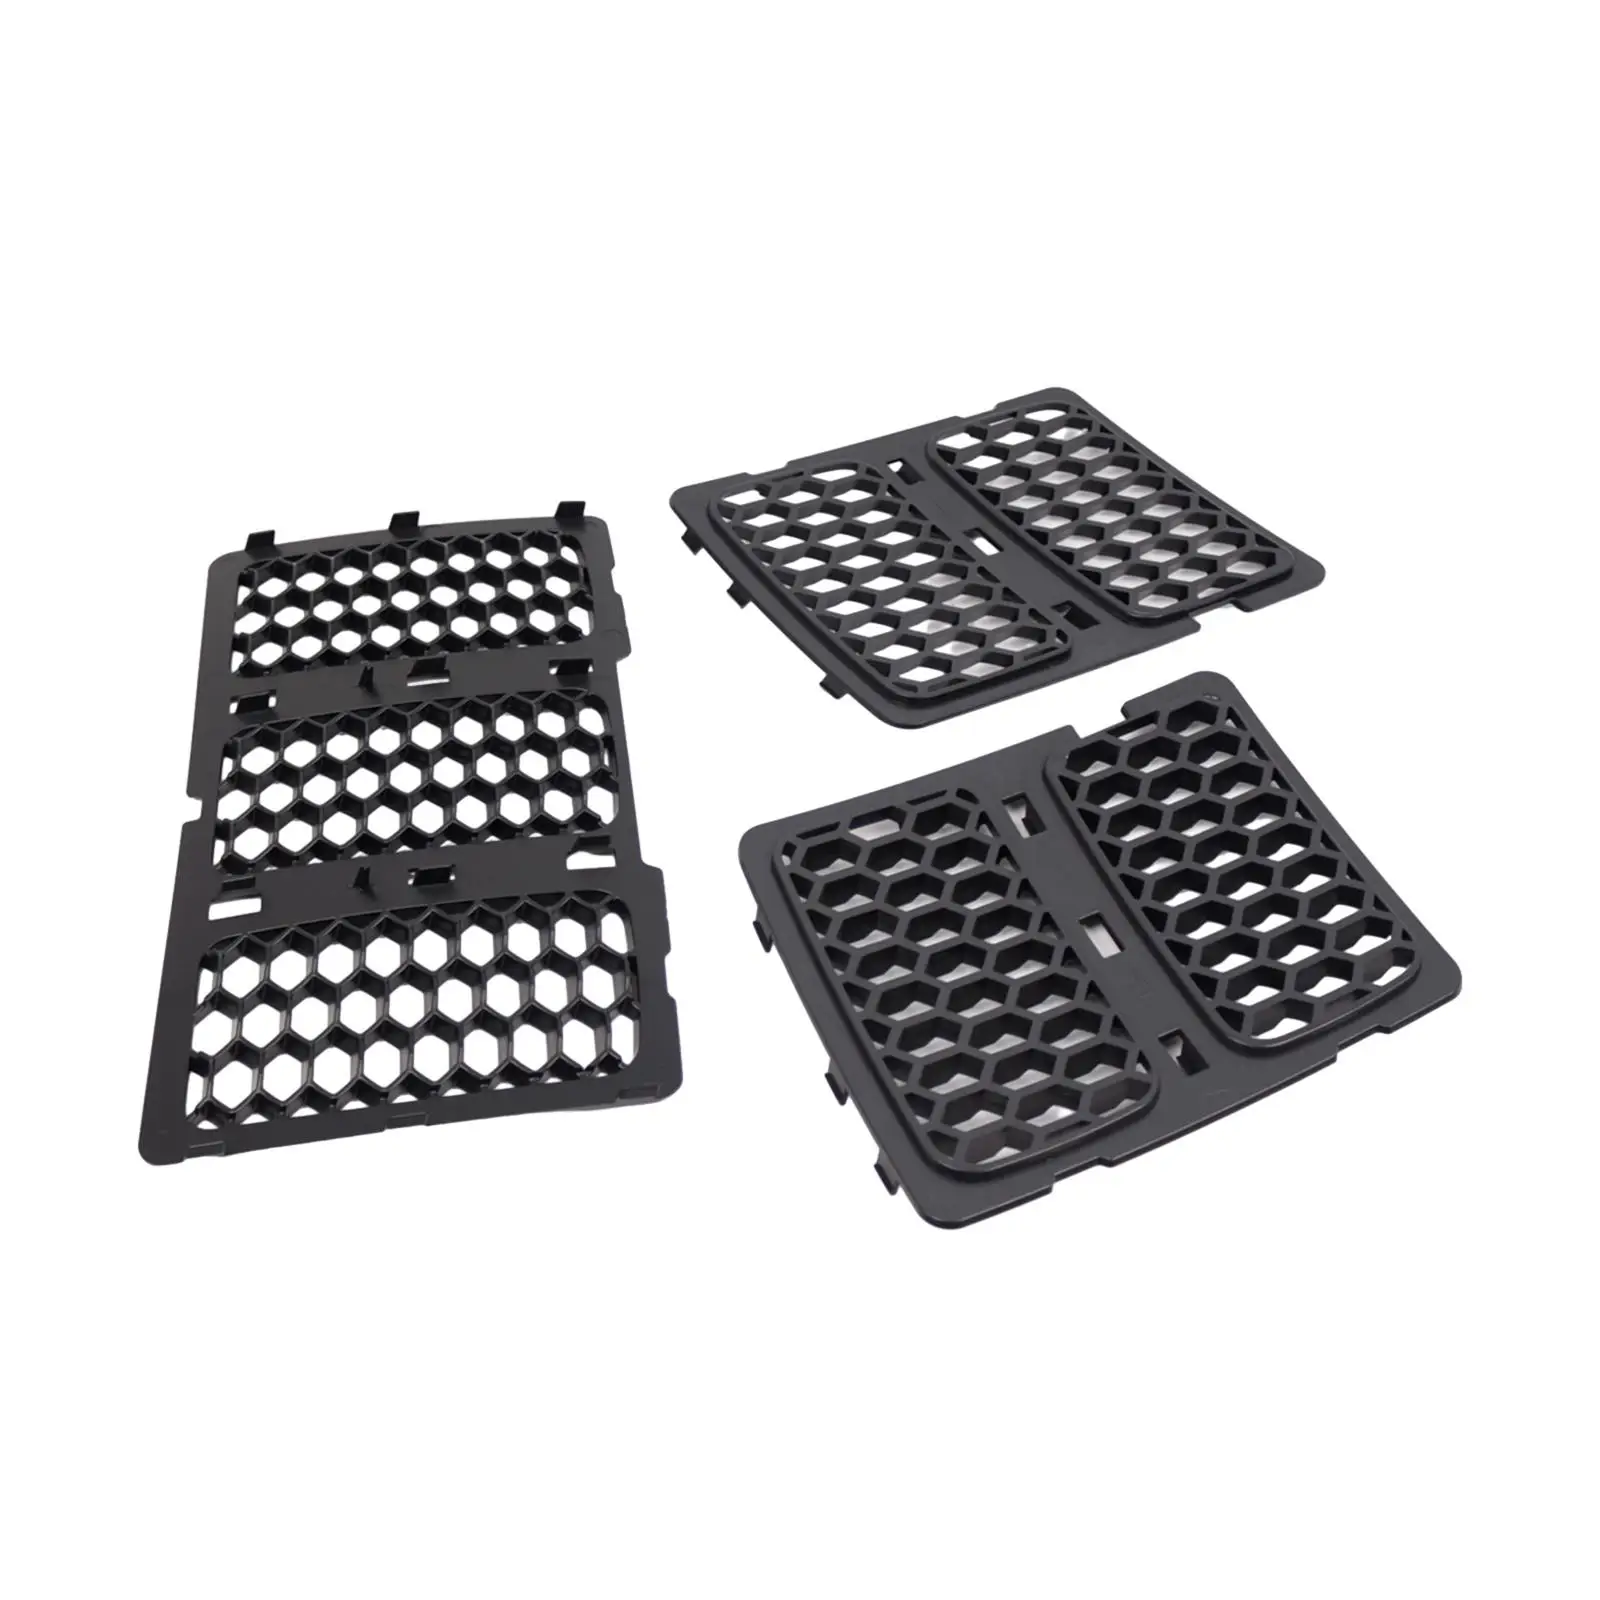 3x Honeycomb Grille Inserts Mesh Grill Durable for Jeep Grand Cherokee